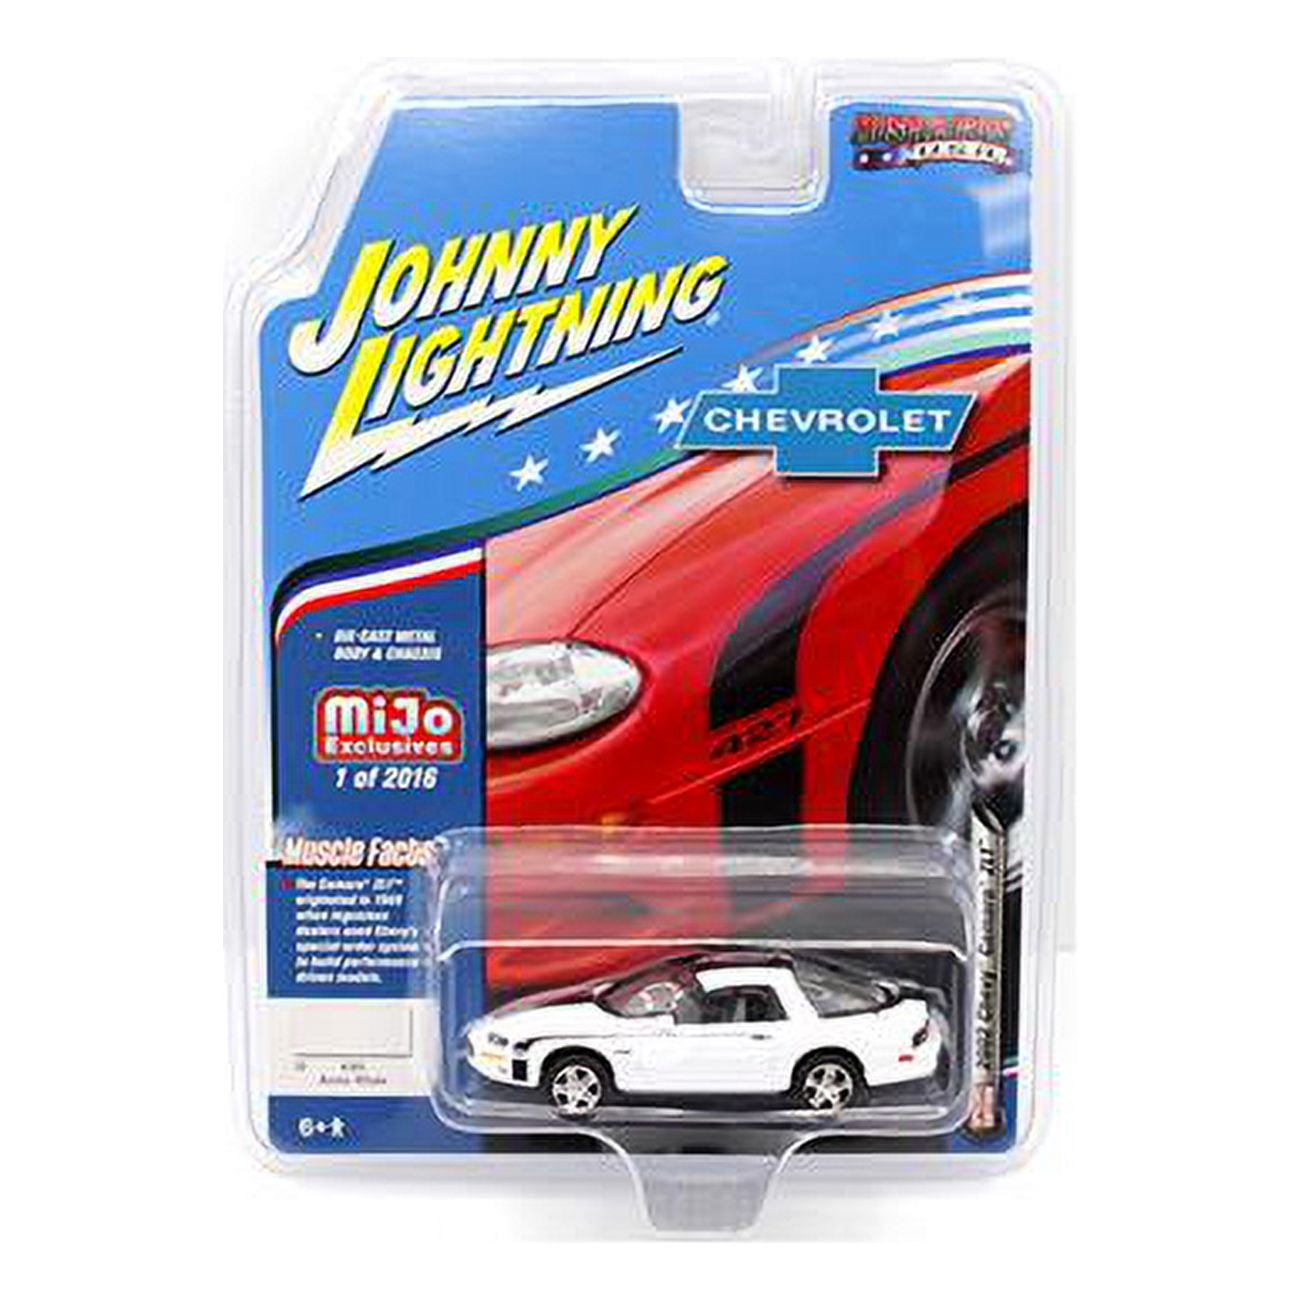 Jlcp7139 2002 Chevrolet Camaro Zl1 427 Muscle Cars Usa Limited Edition To 2,016 Pieces Worldwide - White